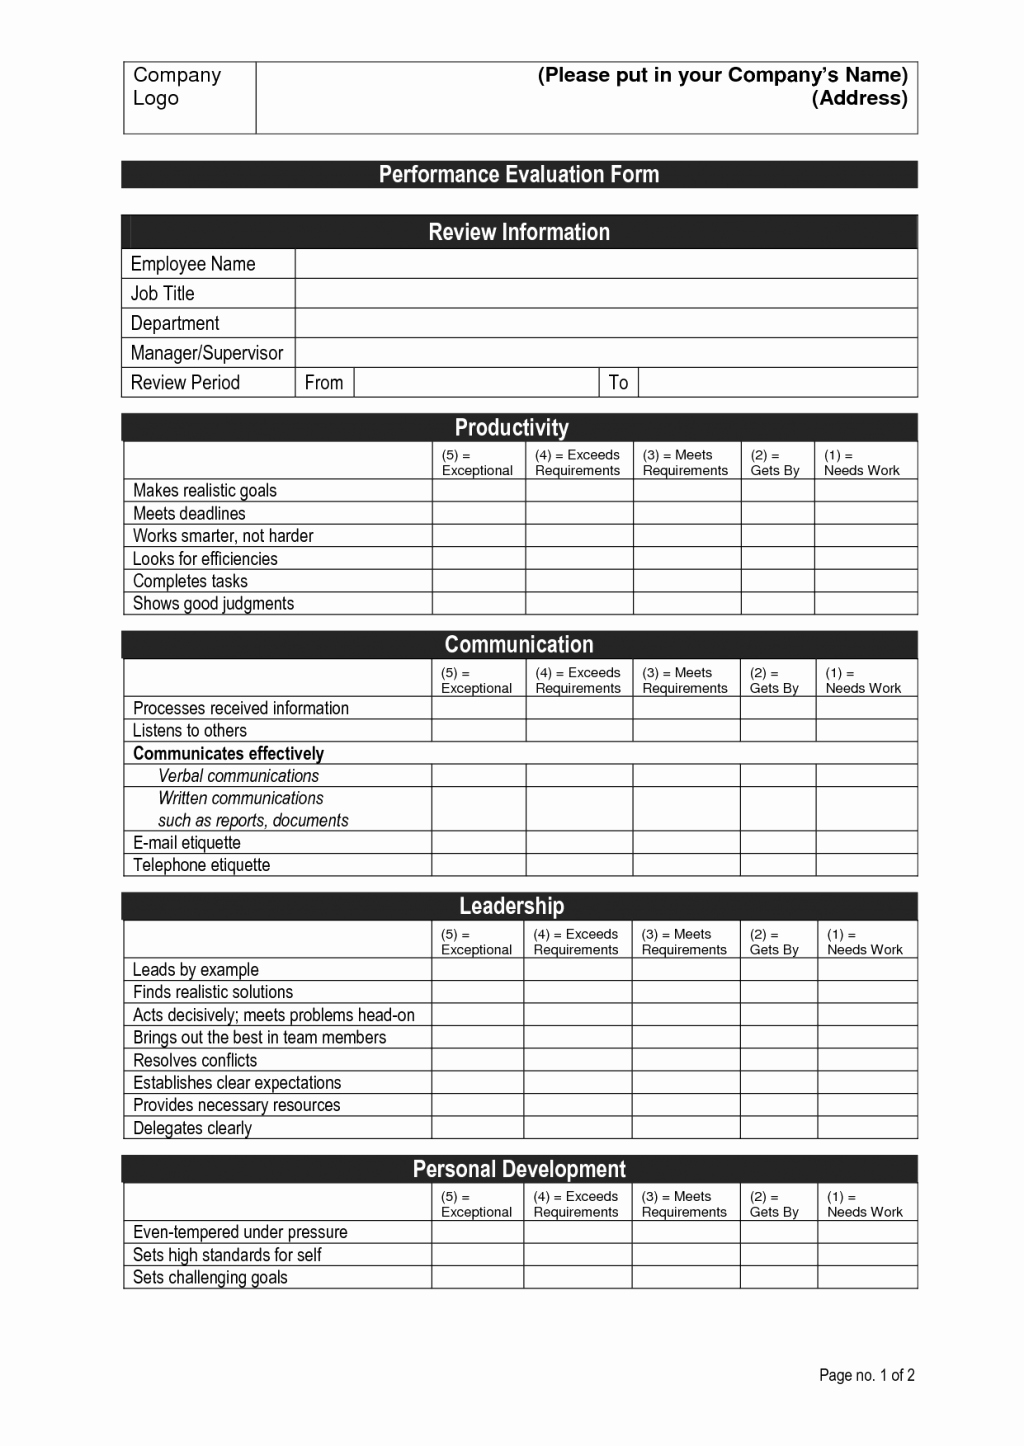 Performance Review form Template New Employee Performance Review Template Doc Evaluation form